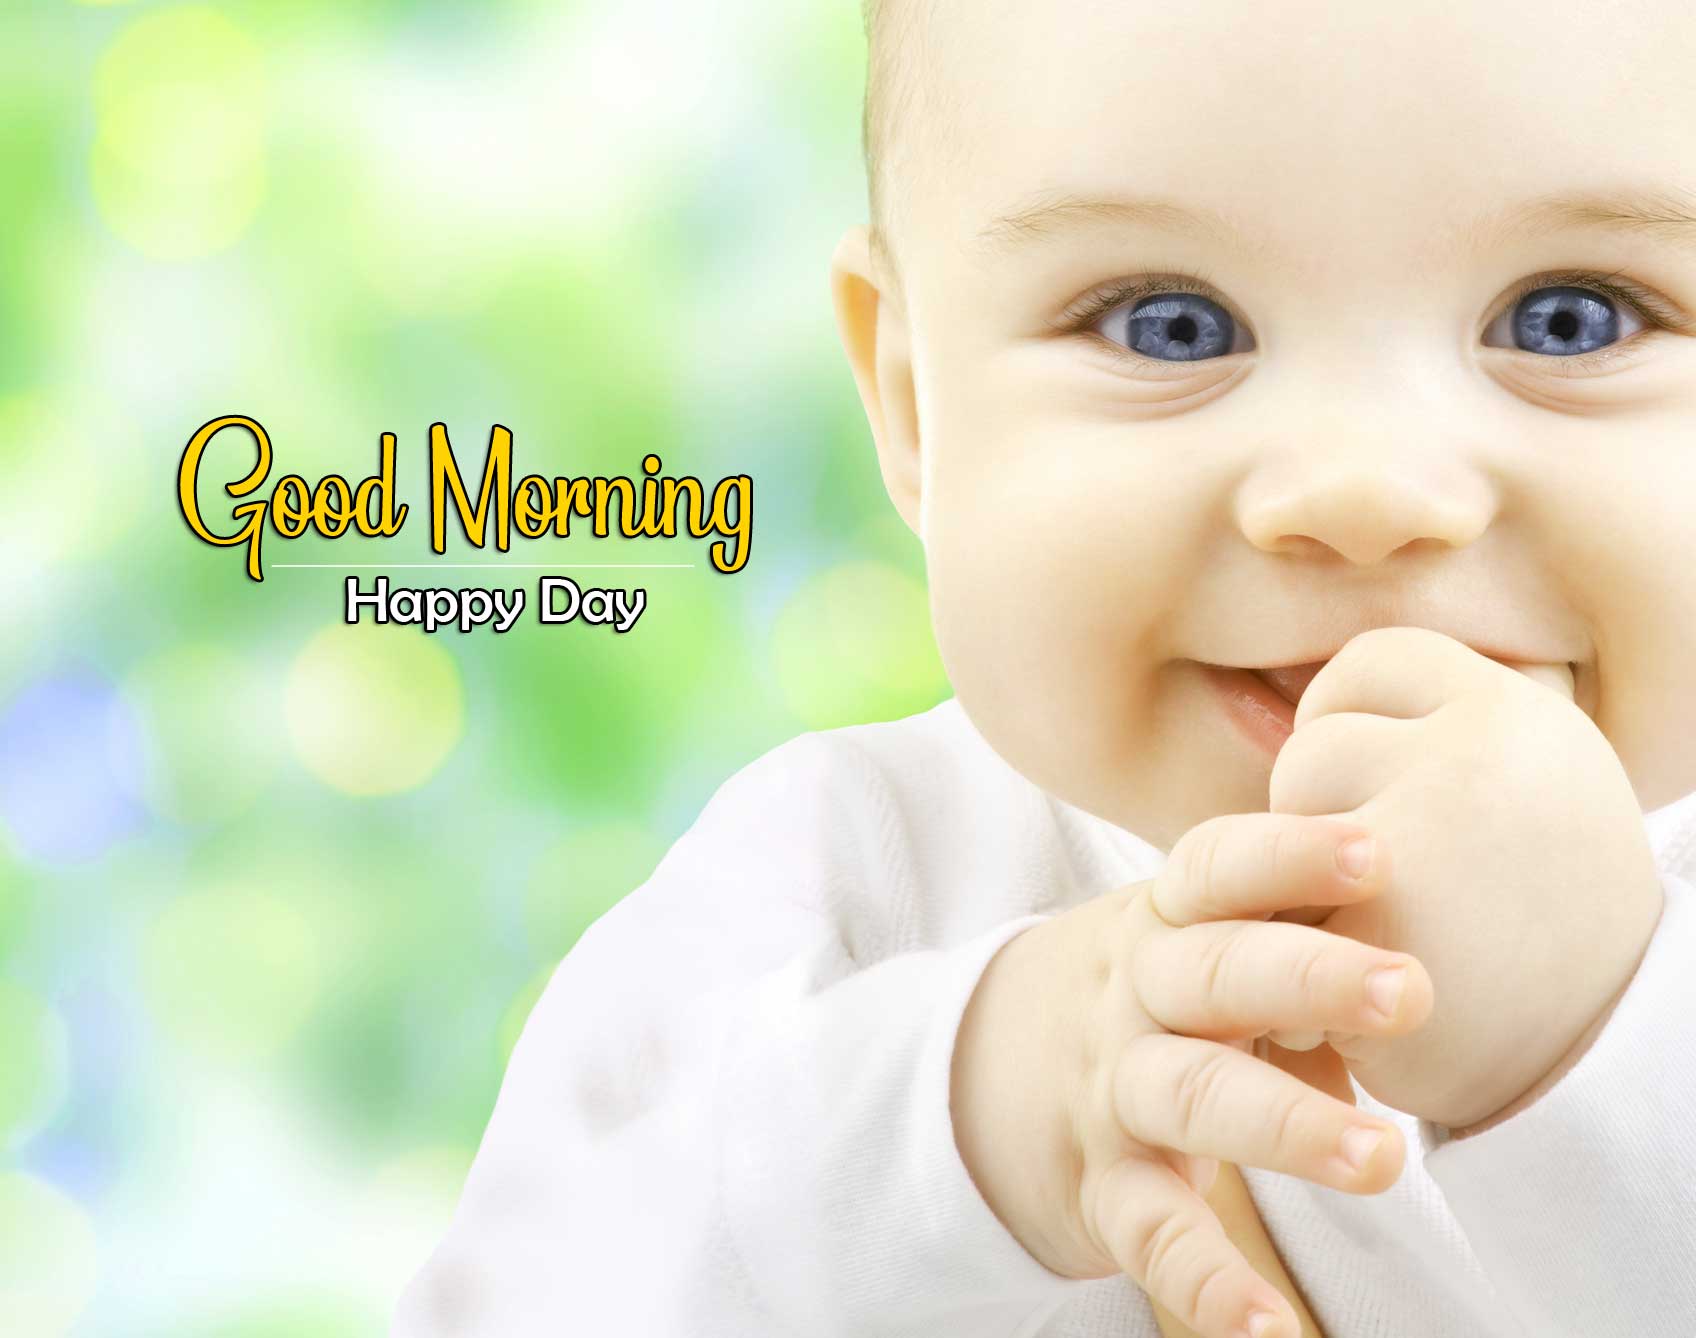 Cute Baby Funny Funny Good Morning Images